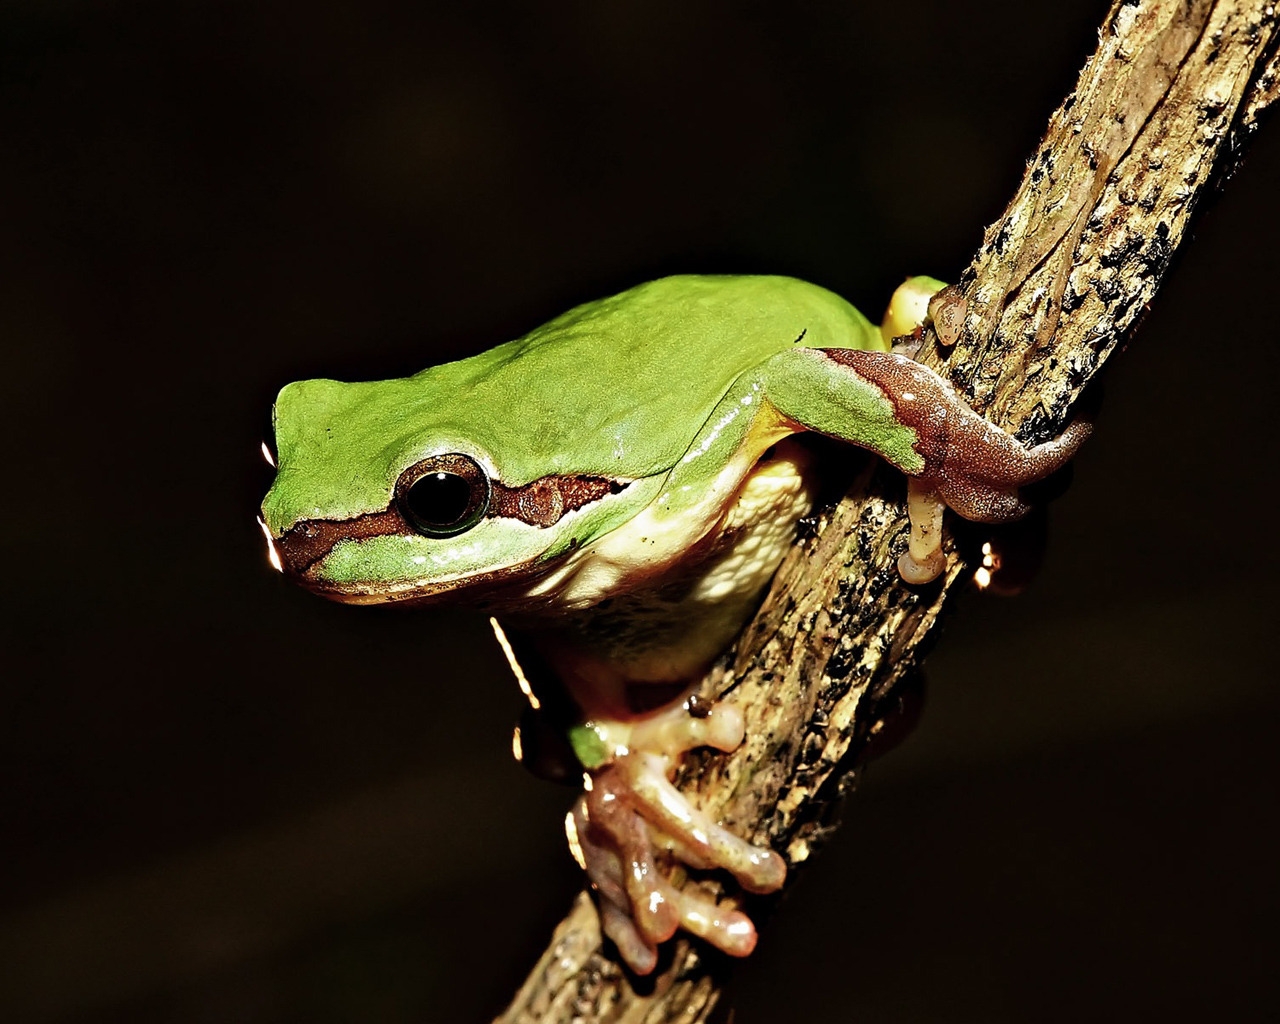 Frog on Tree for 1280 x 1024 resolution